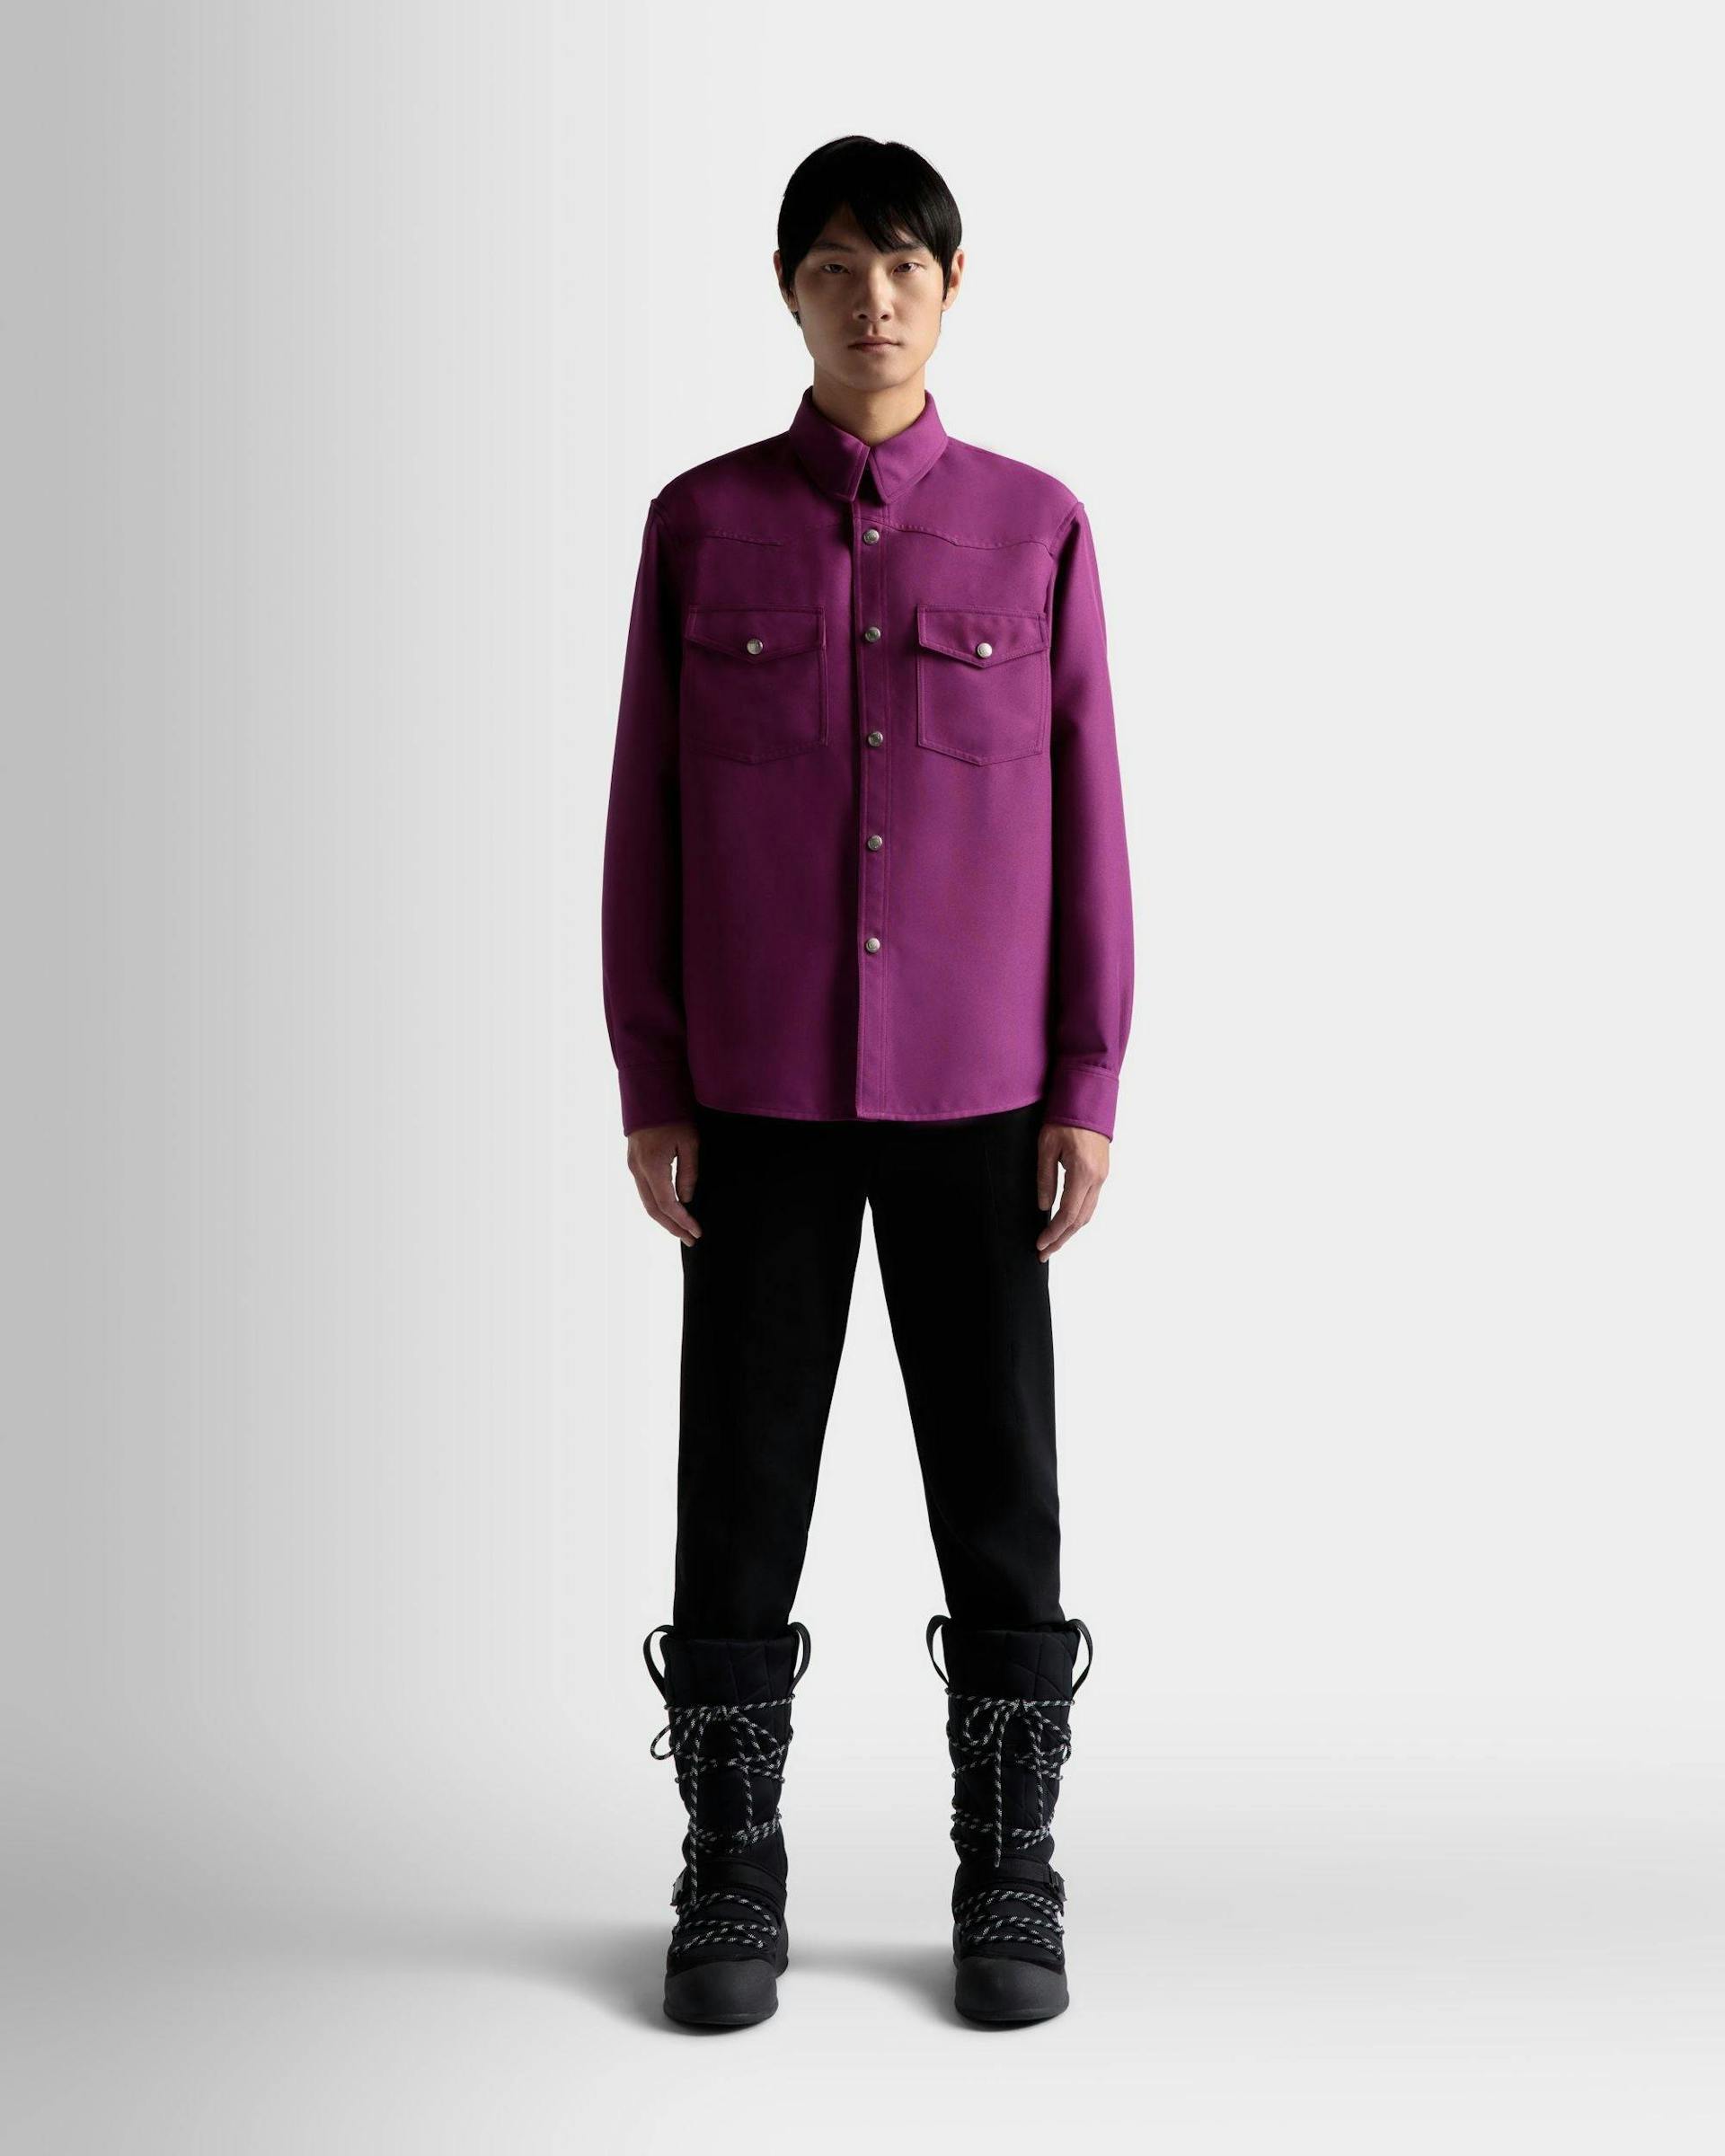 Men's Shirt In Pink | Bally | On Model Front